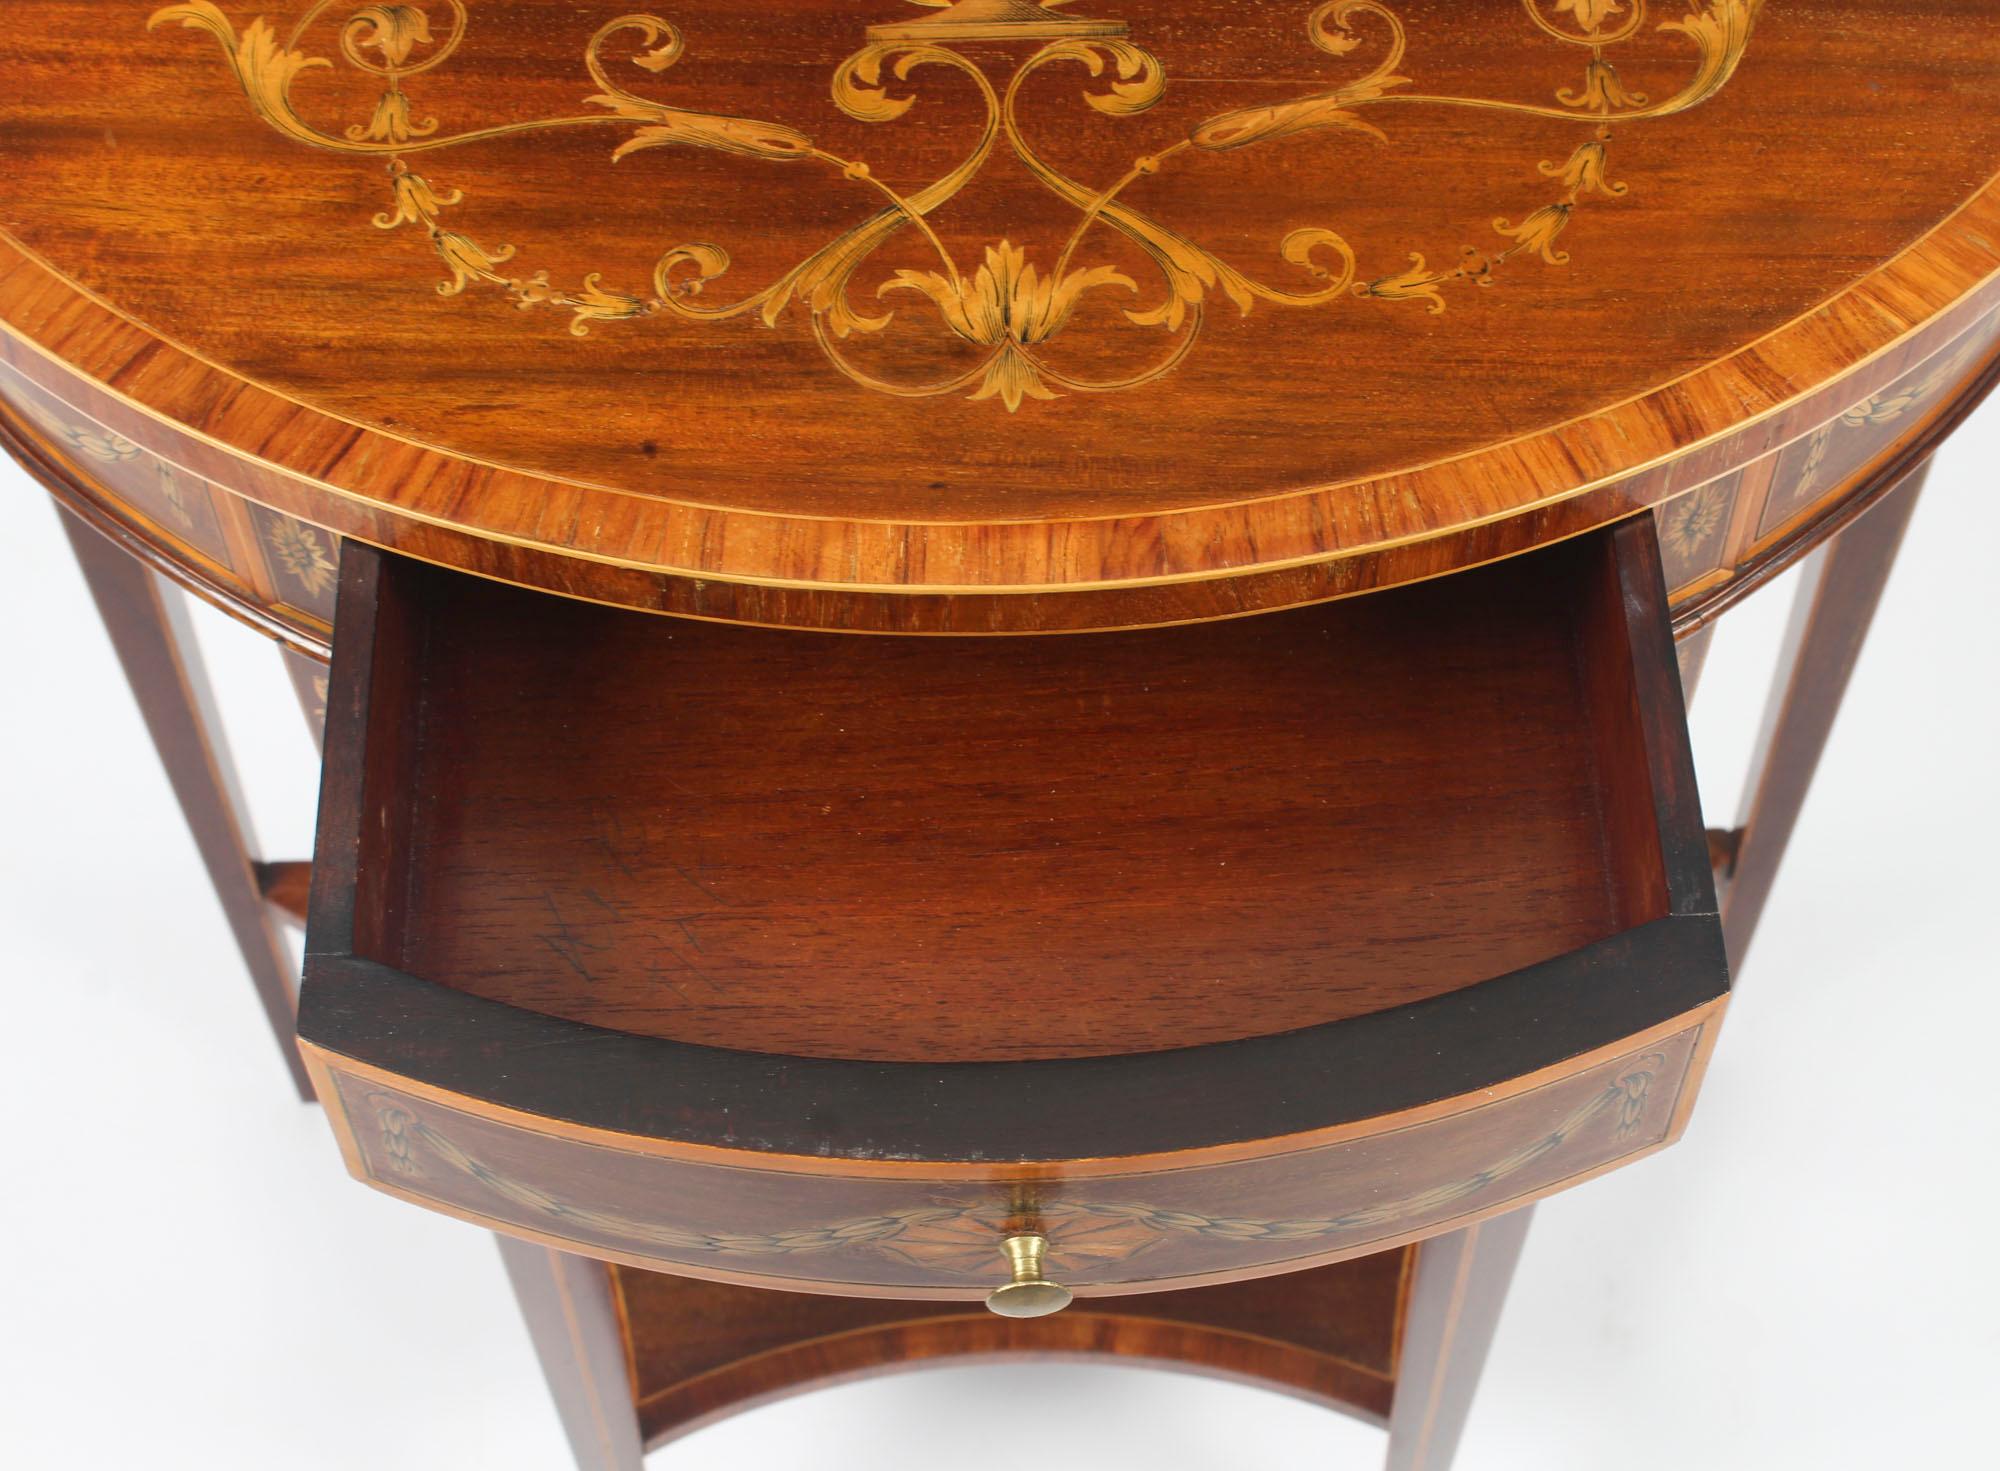 Antique Regency Revival Marquetry Console Table, 19th Century 2